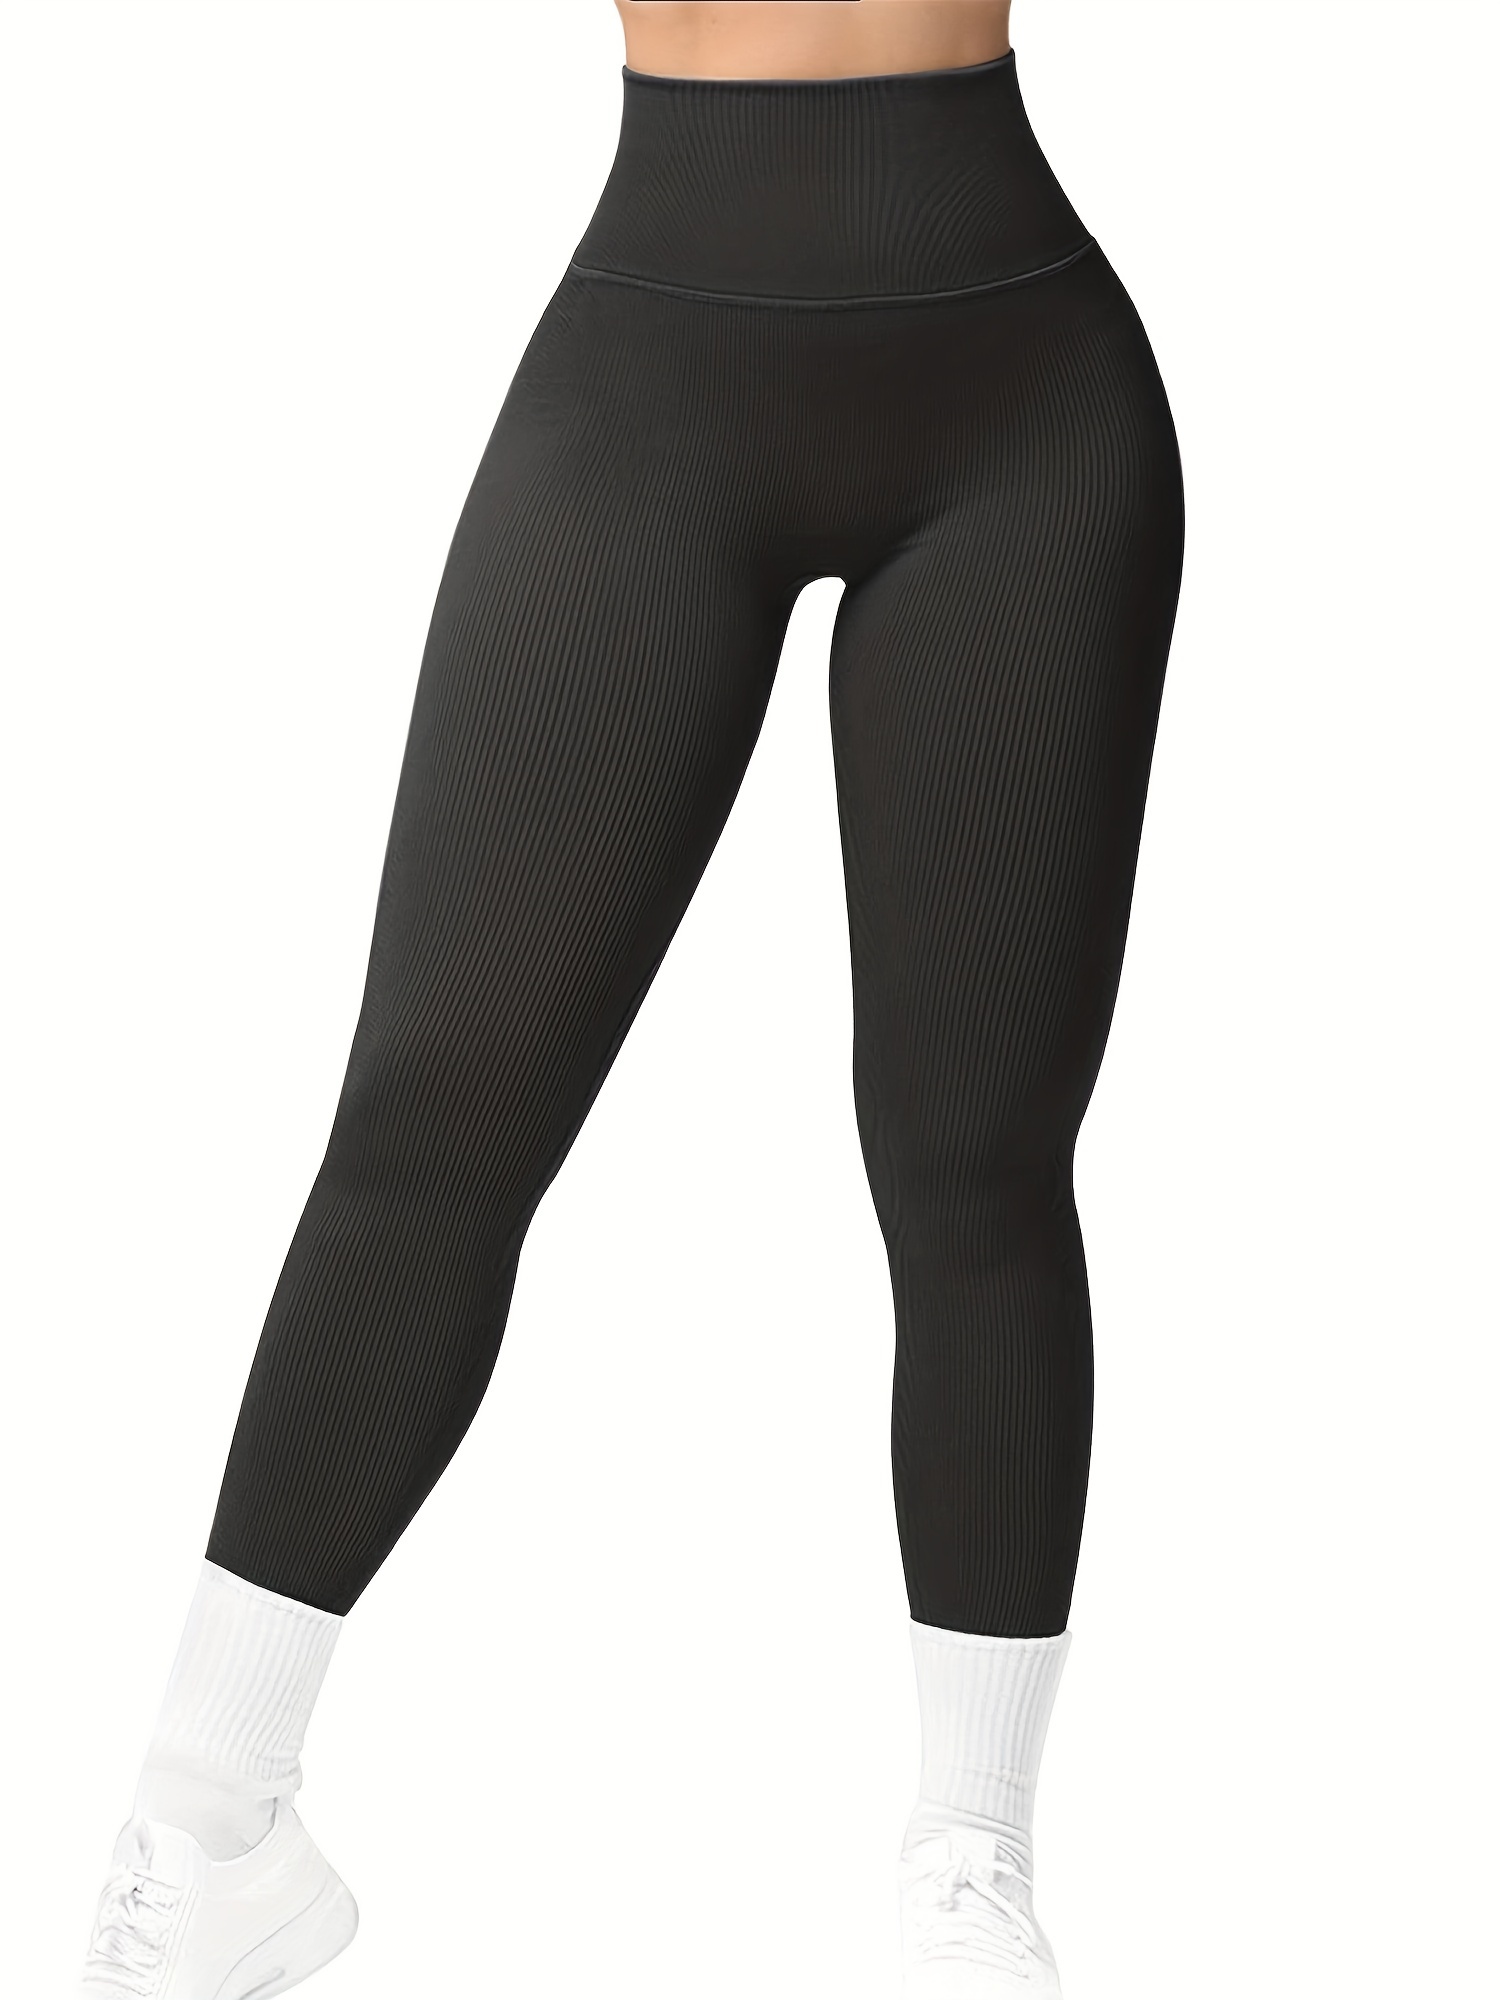 Jalioing Yoga Leggings for Women High Waist Solid Color Ribbed